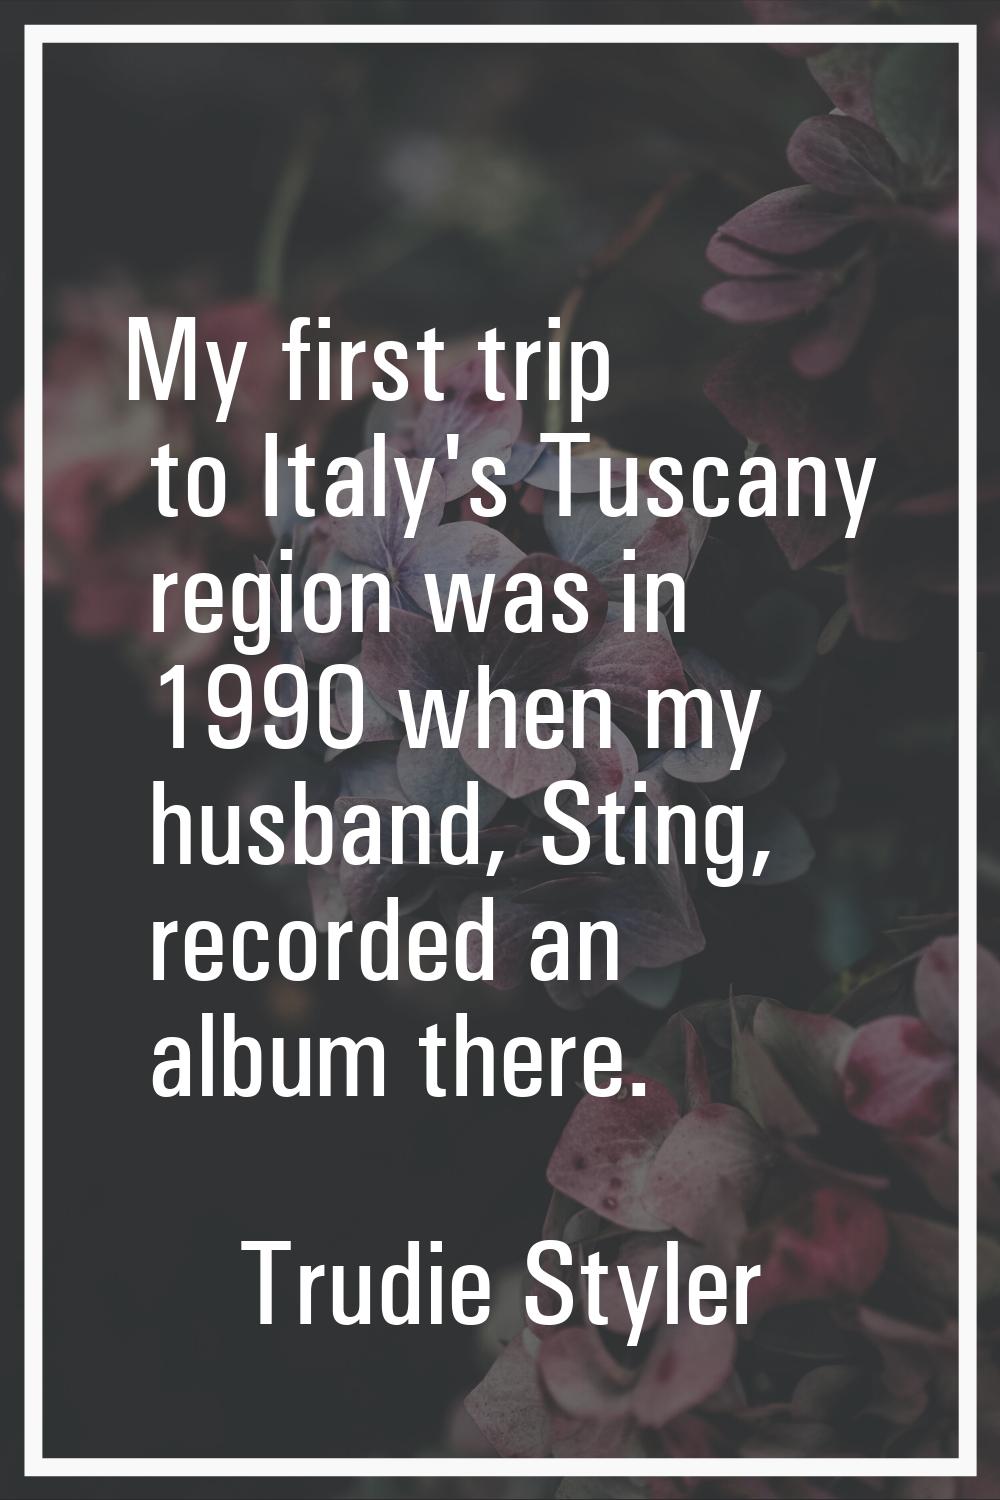 My first trip to Italy's Tuscany region was in 1990 when my husband, Sting, recorded an album there